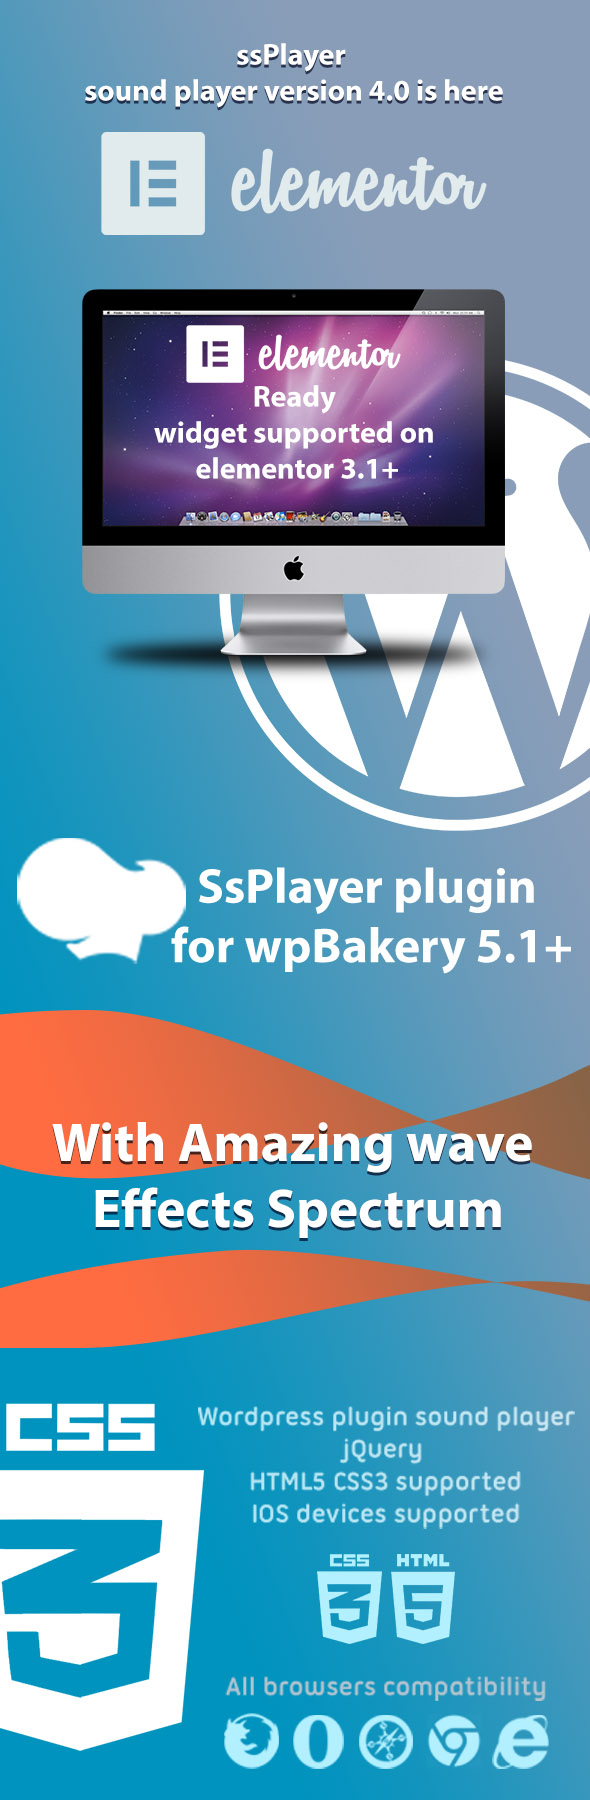 WordPress ssPlayer Sound Player Plugin For WpBakery and Elementor - 1